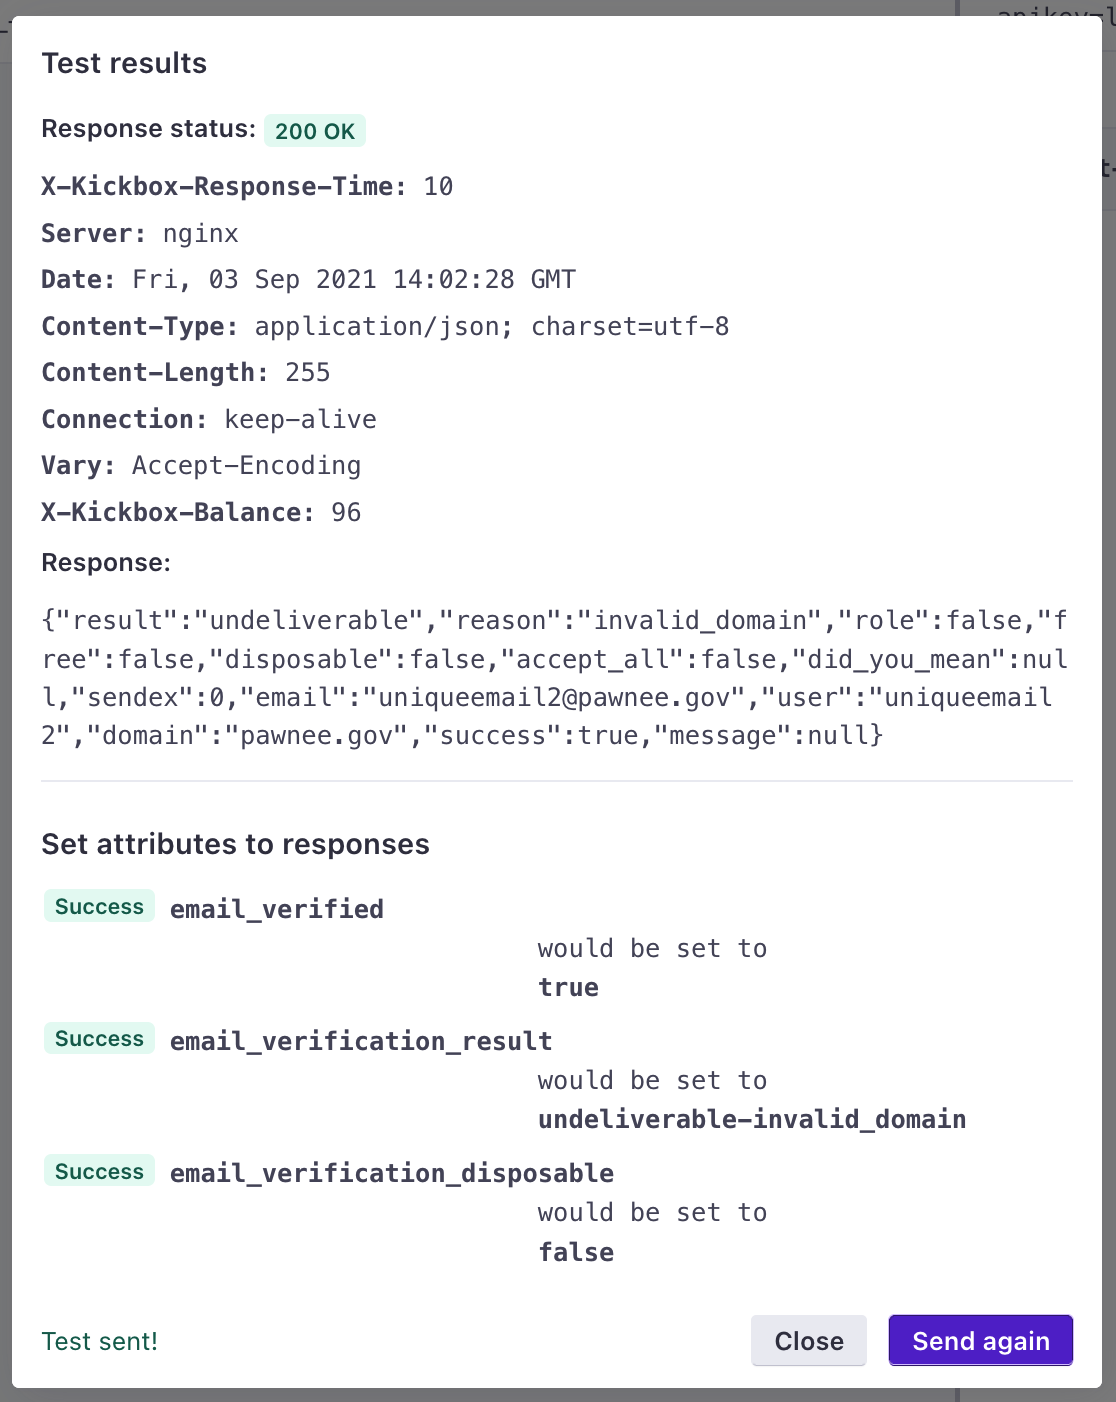 The API response preview, now with the attributes and the values they'd be set with